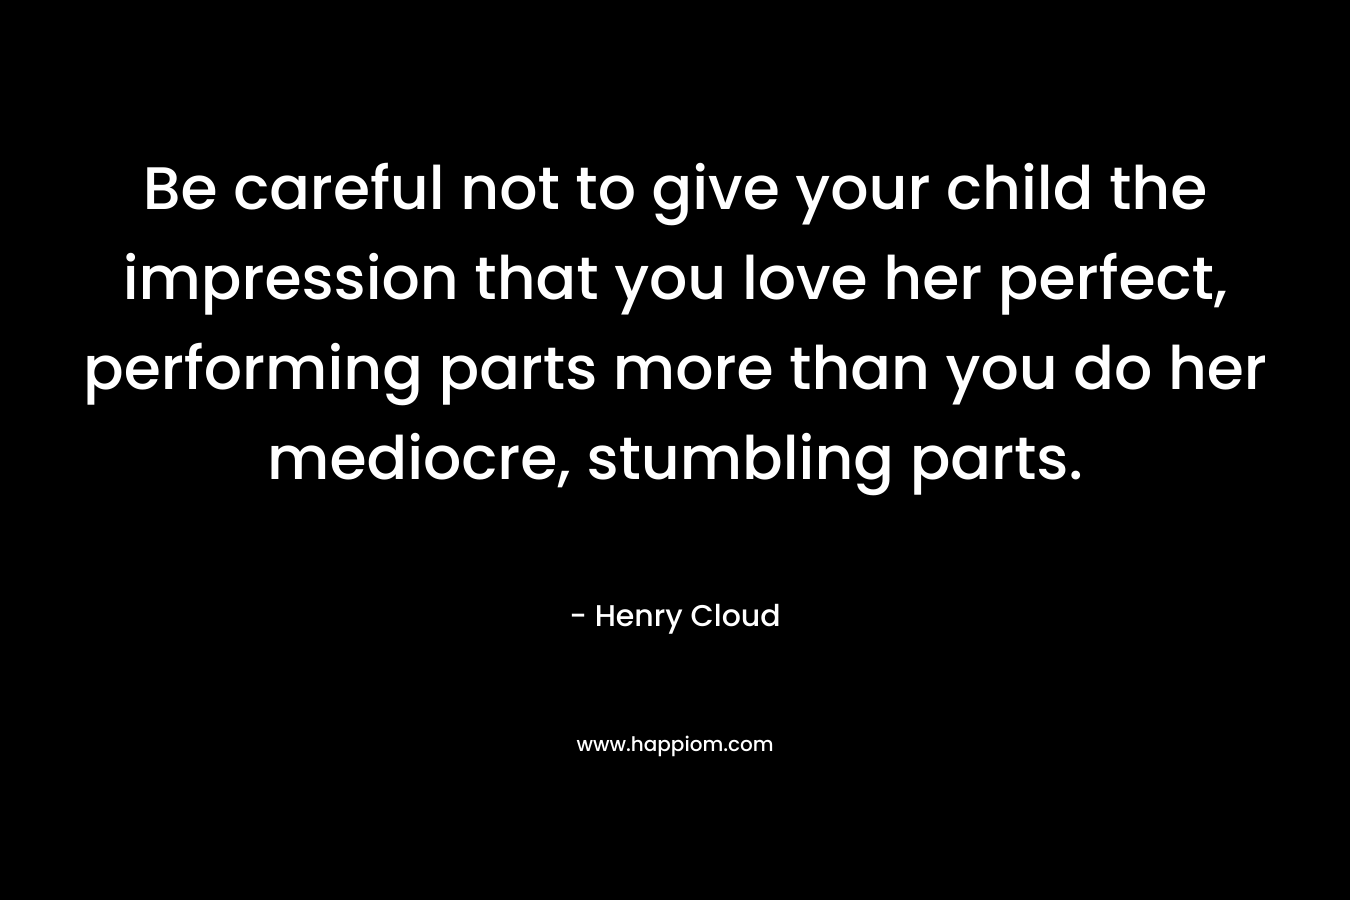 Be careful not to give your child the impression that you love her perfect, performing parts more than you do her mediocre, stumbling parts.